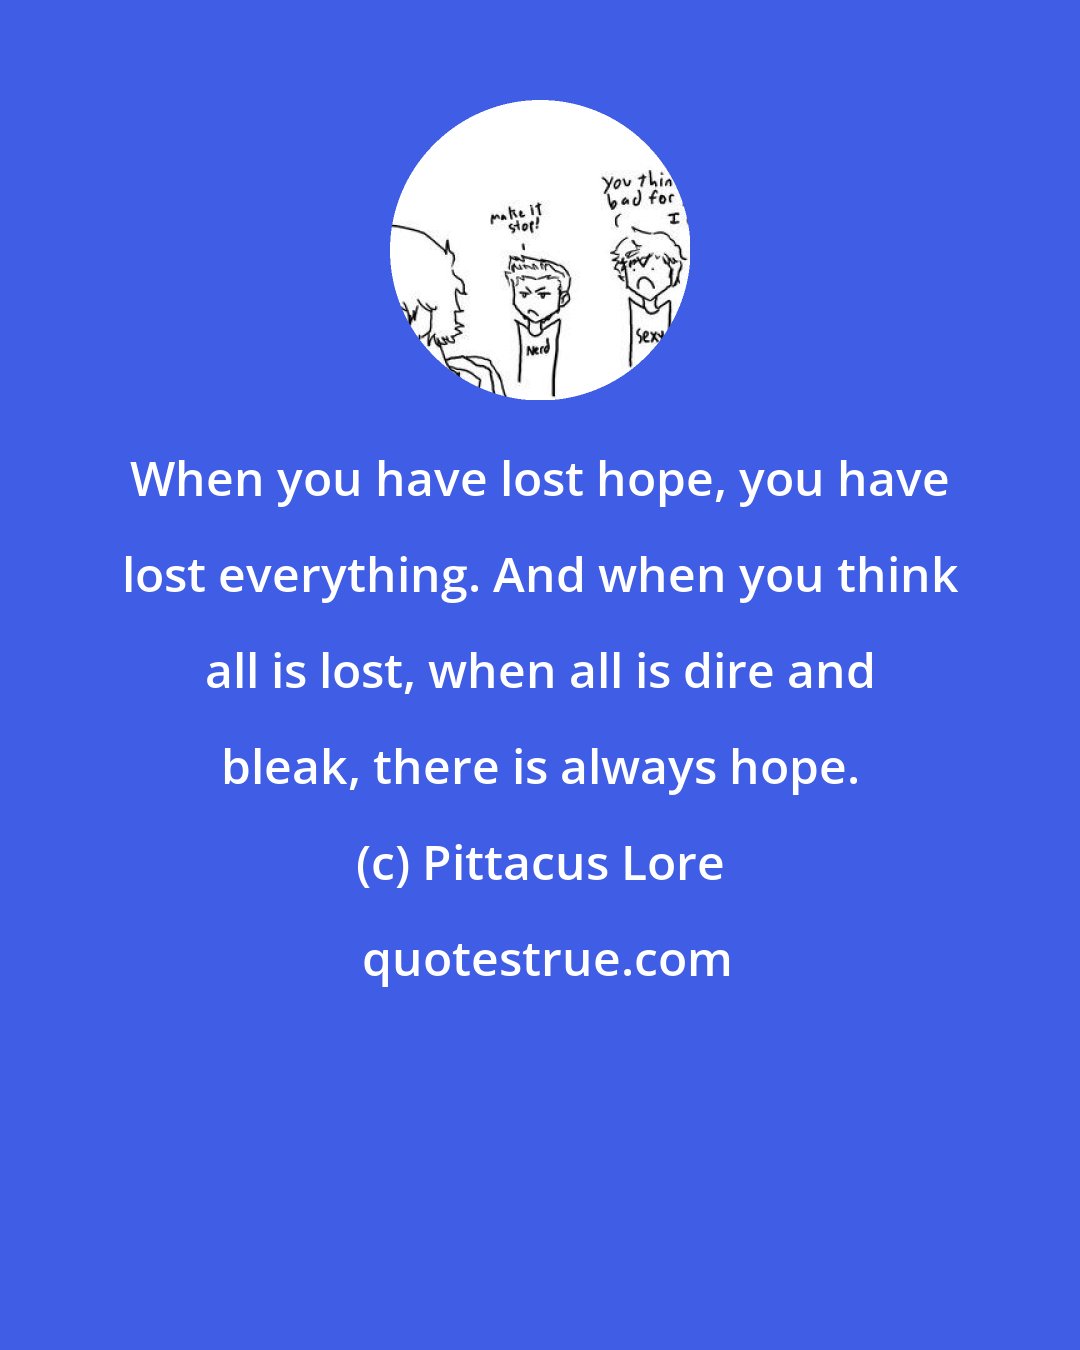 Pittacus Lore: When you have lost hope, you have lost everything. And when you think all is lost, when all is dire and bleak, there is always hope.